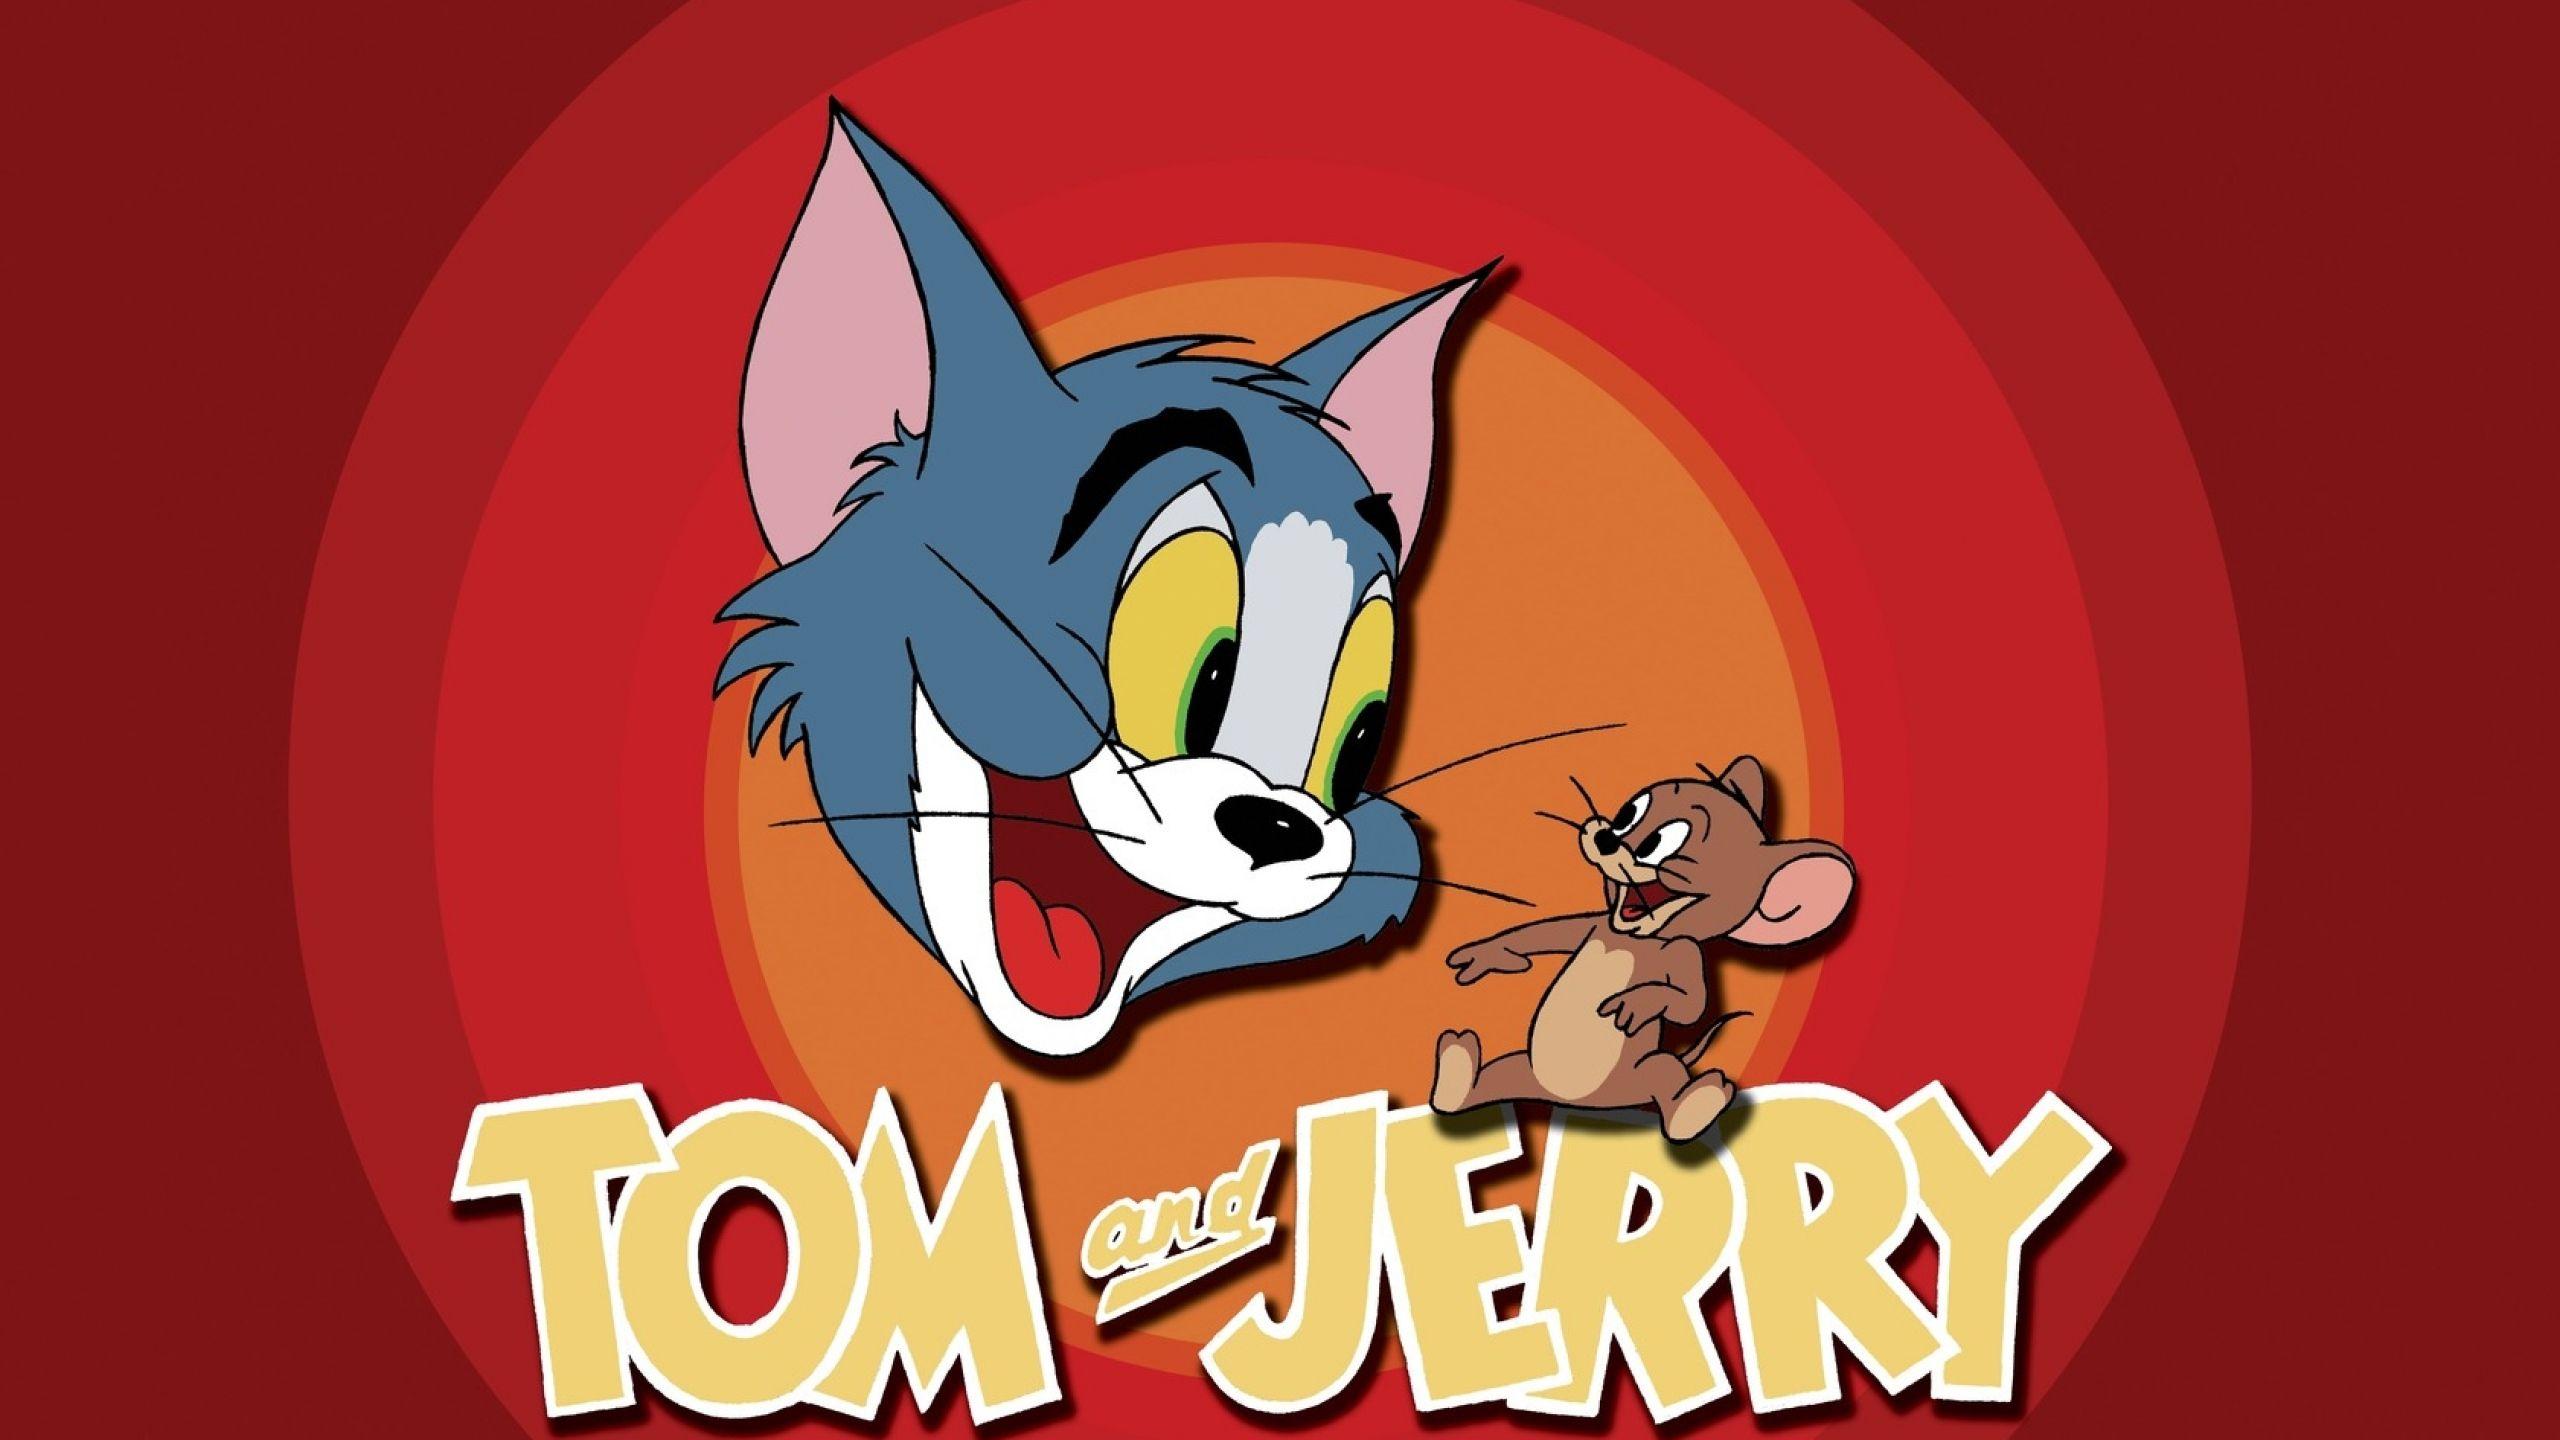 Tom and Jerry Wallpaper Download HD Image and Latest Photo